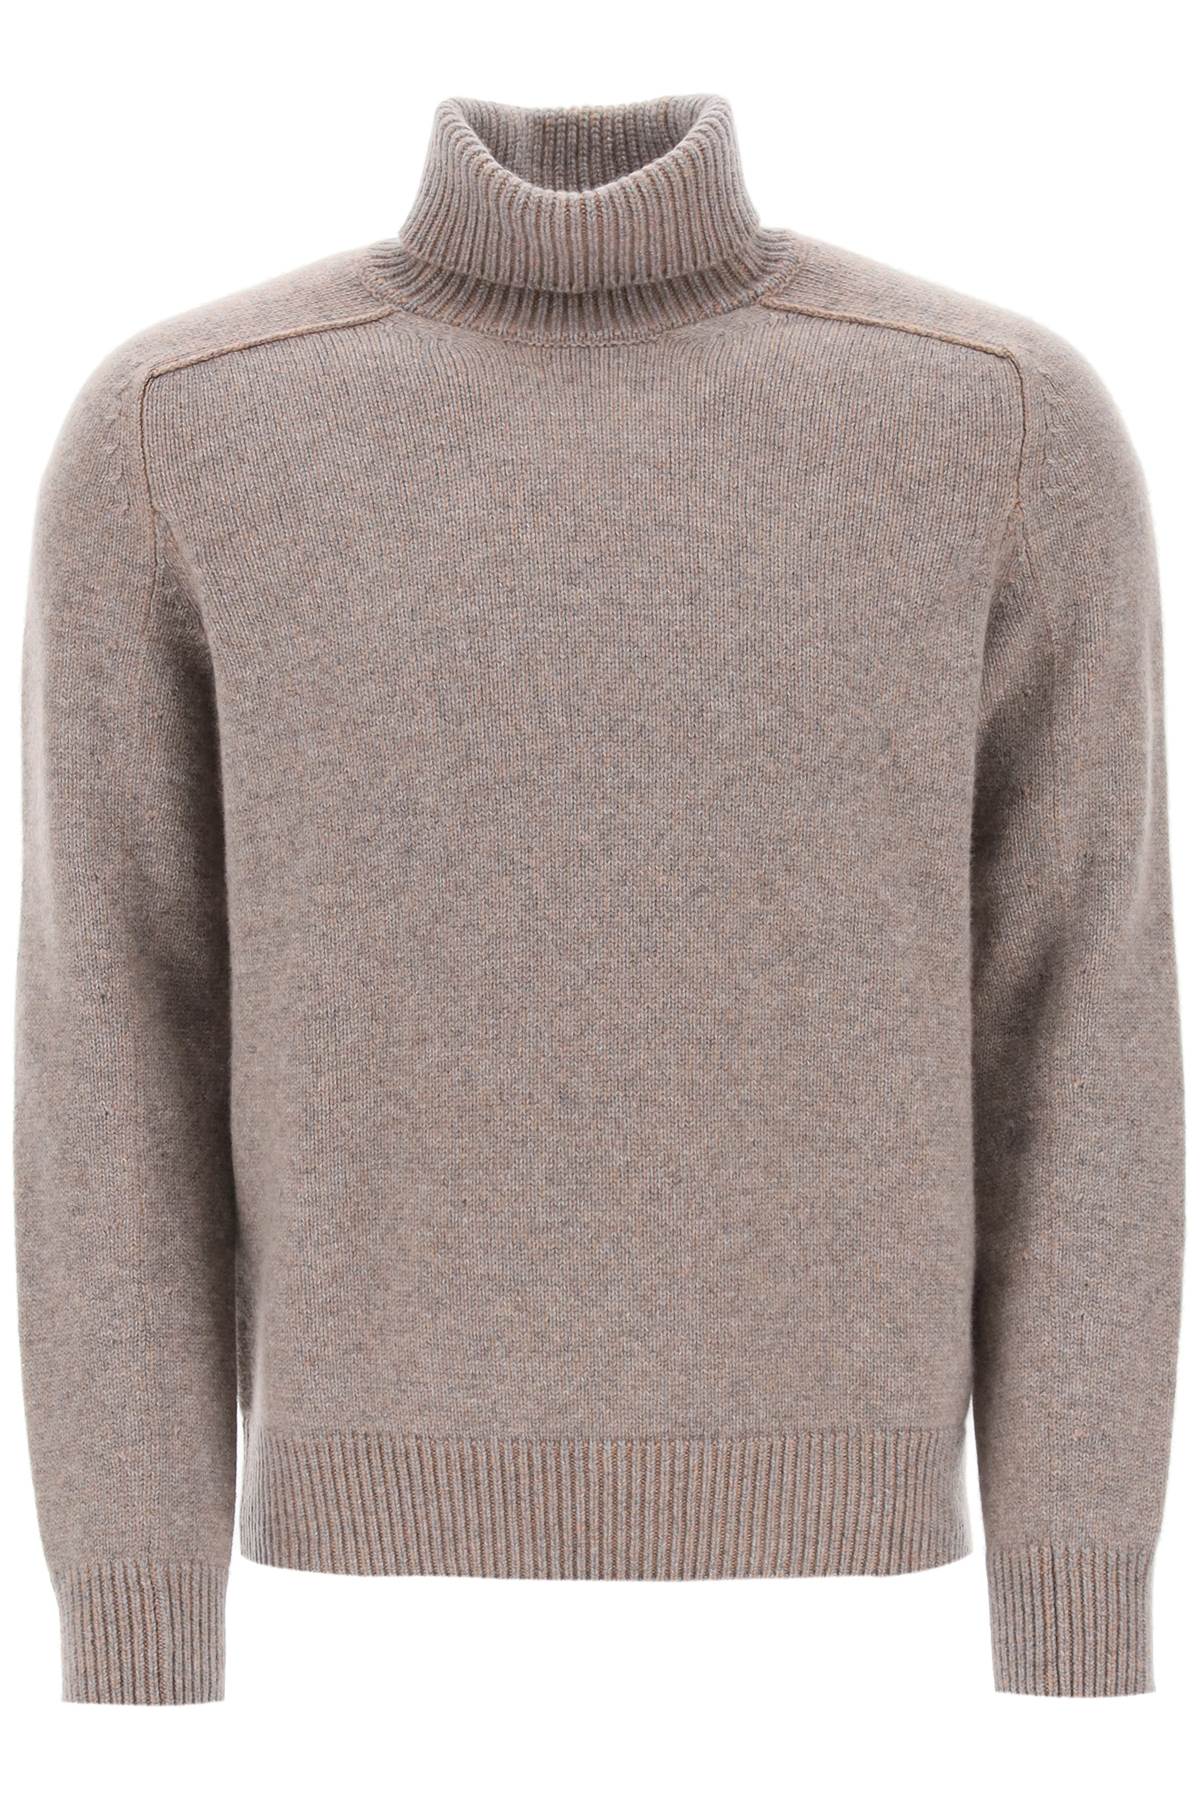 ZEGNA TURTLENECK SWEATER IN CASHMERE